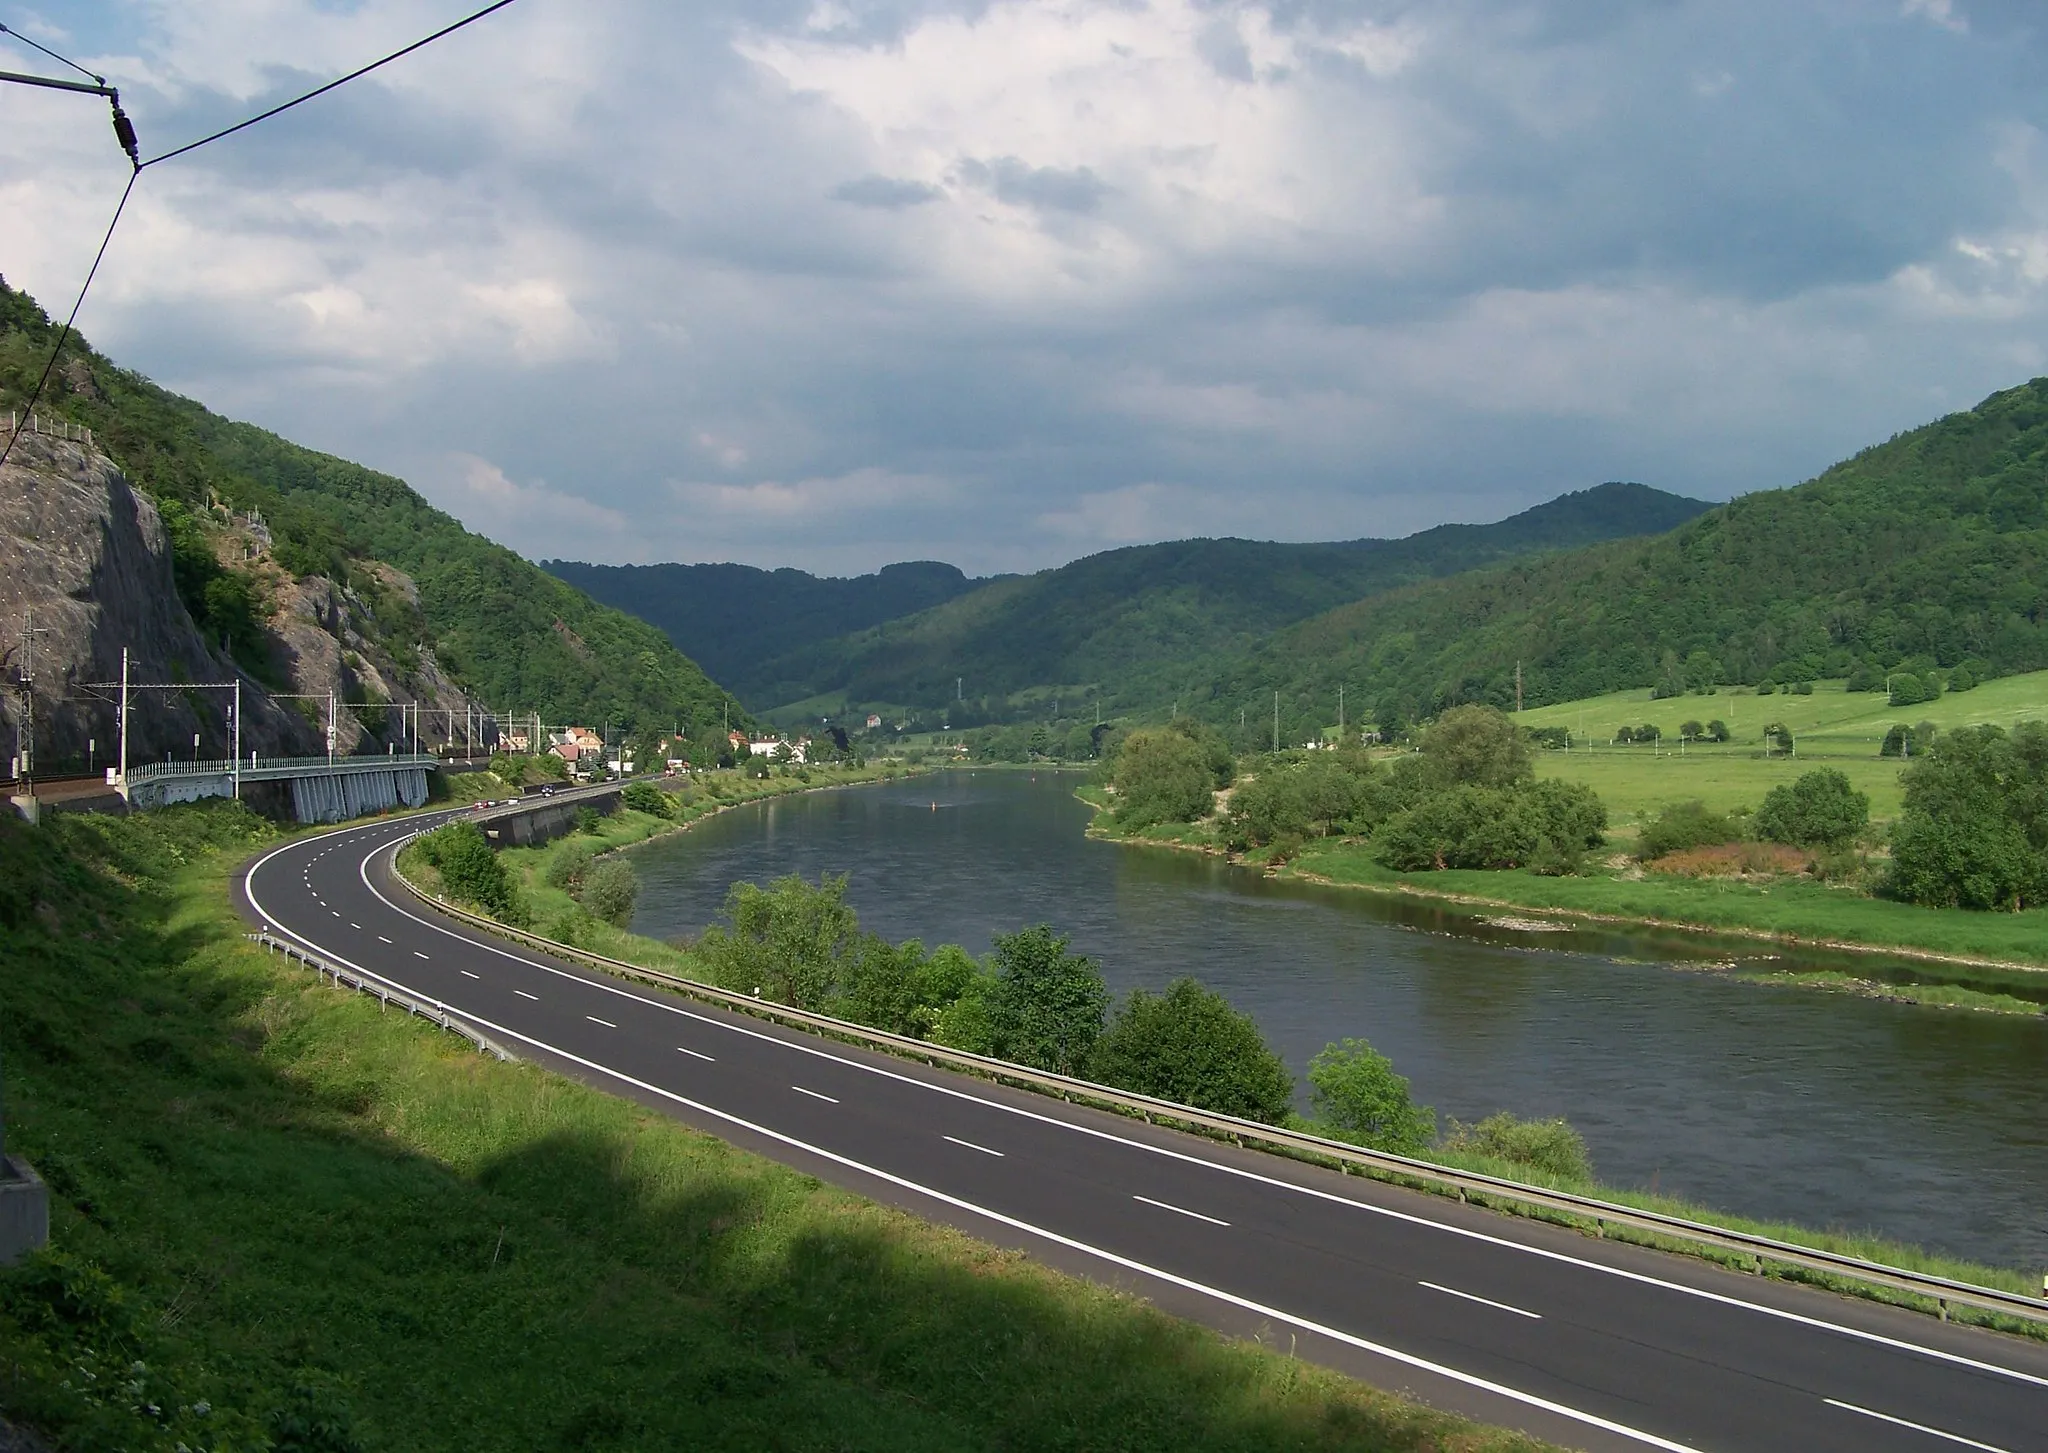 Photo showing: Povrly-Roztoky, Ústí nad Labem District, Ústí nad Labem Region, the Czech Republic. A view from Povrly to Roztoky, seen from the train.